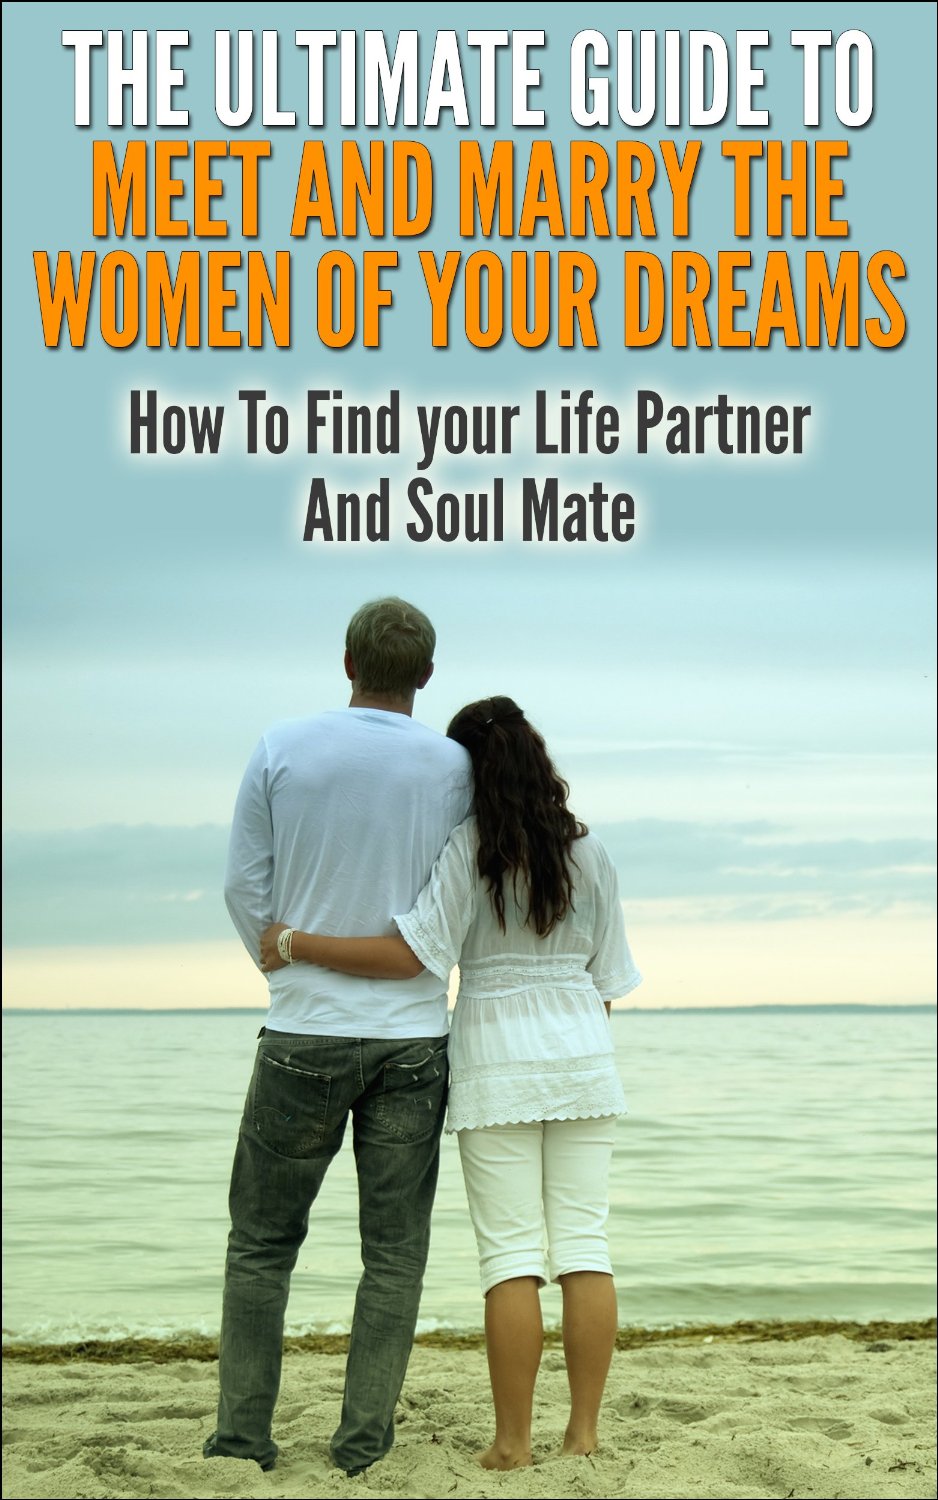 The Ultimate Guide To Meet And Marry The Women Of Your Dreams: How To Find Your Life Partner And Soul Mate by George K.